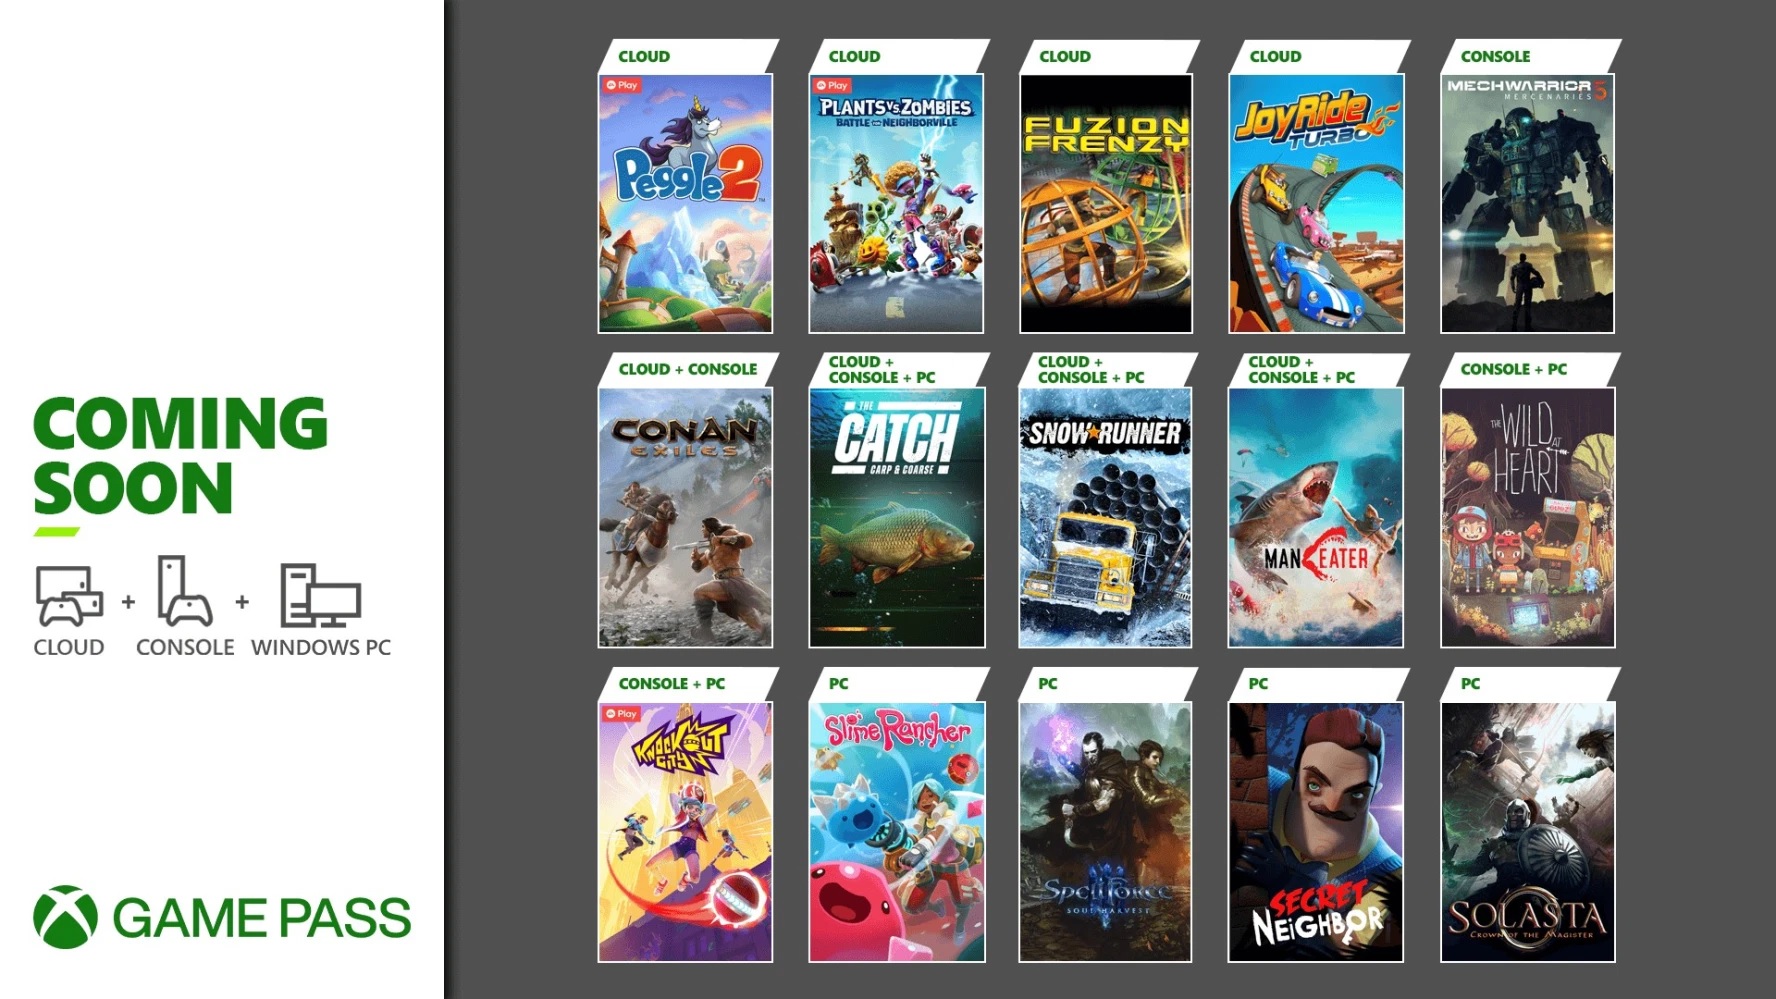 Xbox Game Pass Adds 15 New Games, Gets Ascent at Launch, and Loses Kingdom Hearts